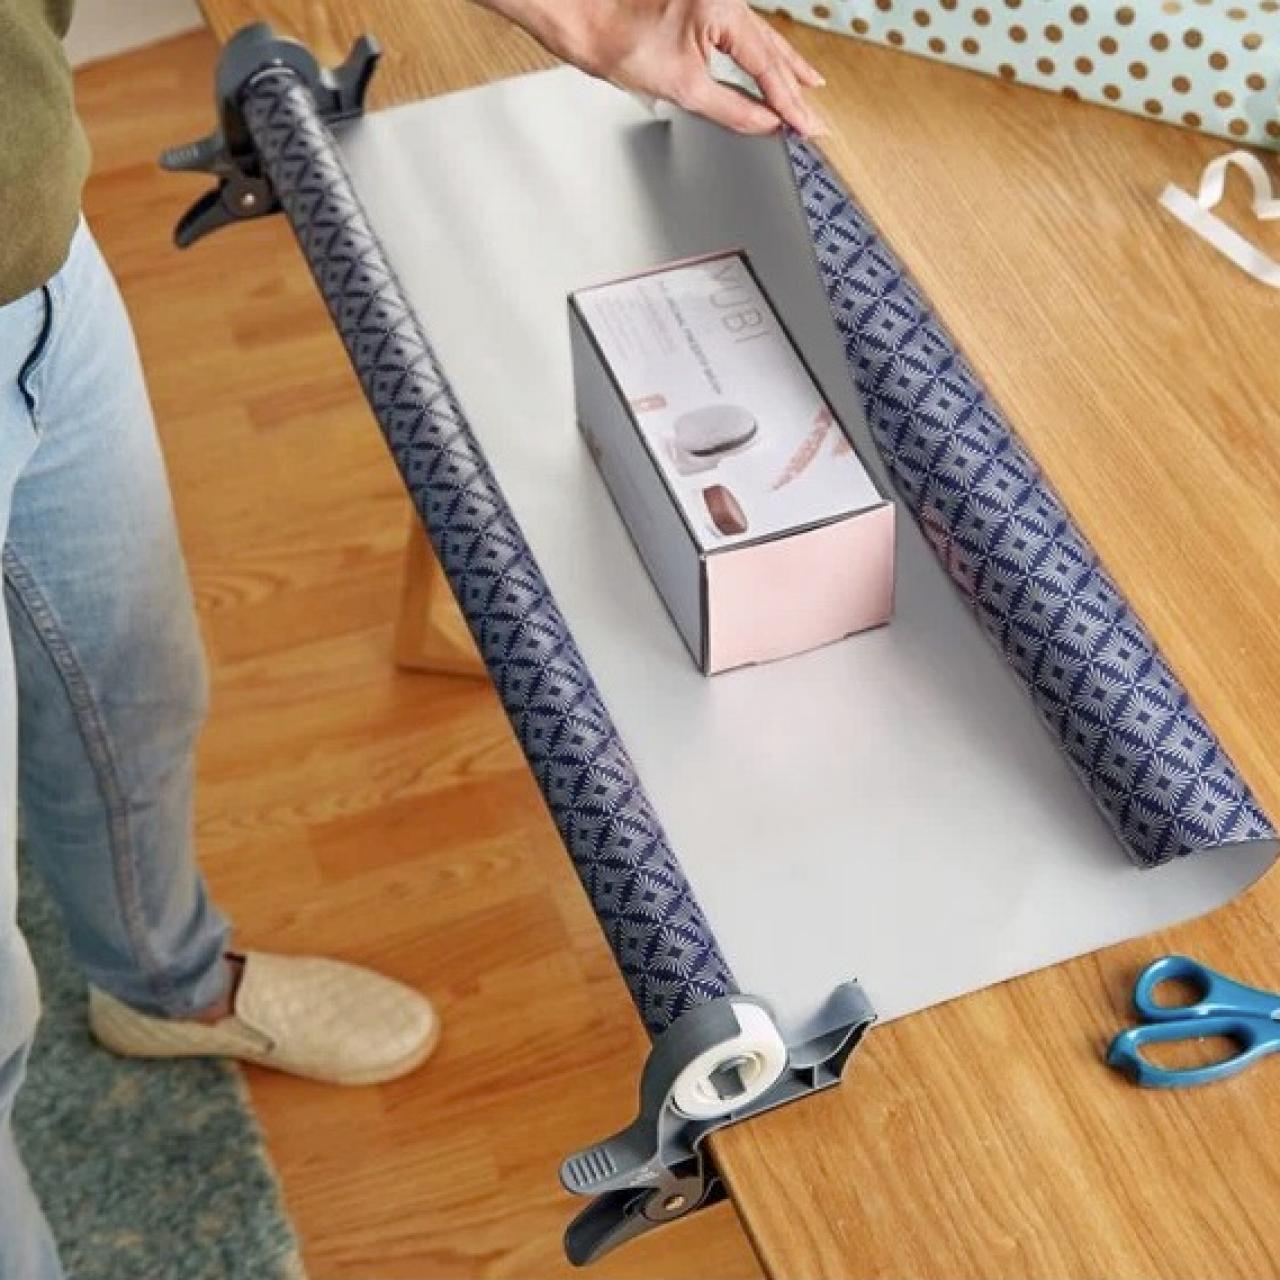 Organize Your Gift Wrapping  Gift wrap organization, Crate storage, Crate  and barrel